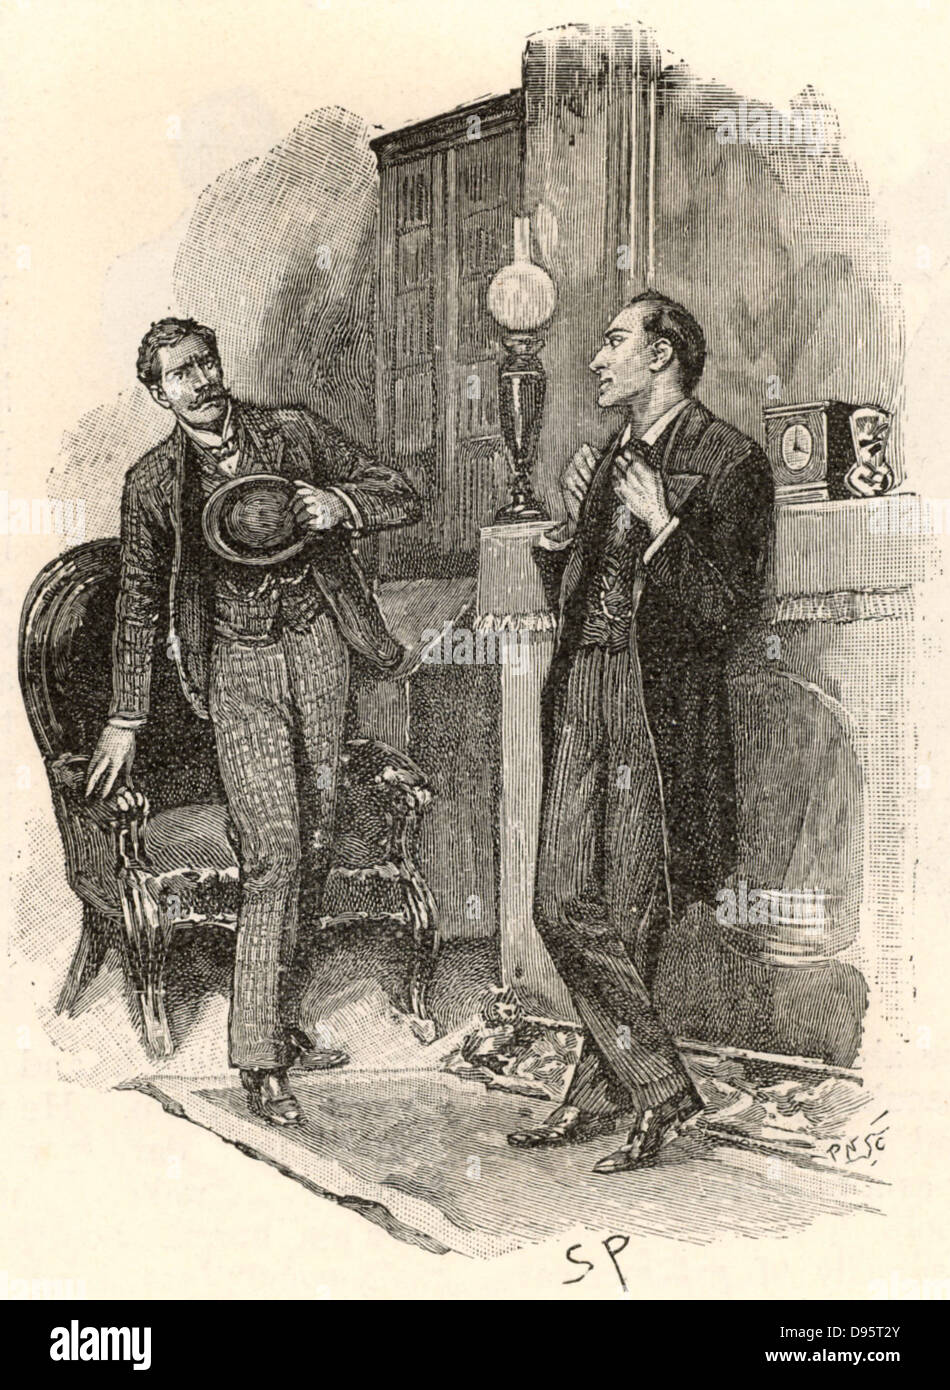 The Adventure of the Yellow Face'. A visitor to Holmes springing up in alarm that the detective should know his name. 'If you wish to preserve your incognito,' said Holmes, smiling, 'I should suggest that you cease to write your name in the lining of your hat ...'.  From 'The Adventures of Sherlock Holmes' by Conan Doyle from 'The Strand Magazine' (London, 1893). Illustration by Sidney E Paget, the first artist to draw Sherlock Holmes.  Engraving. Stock Photo